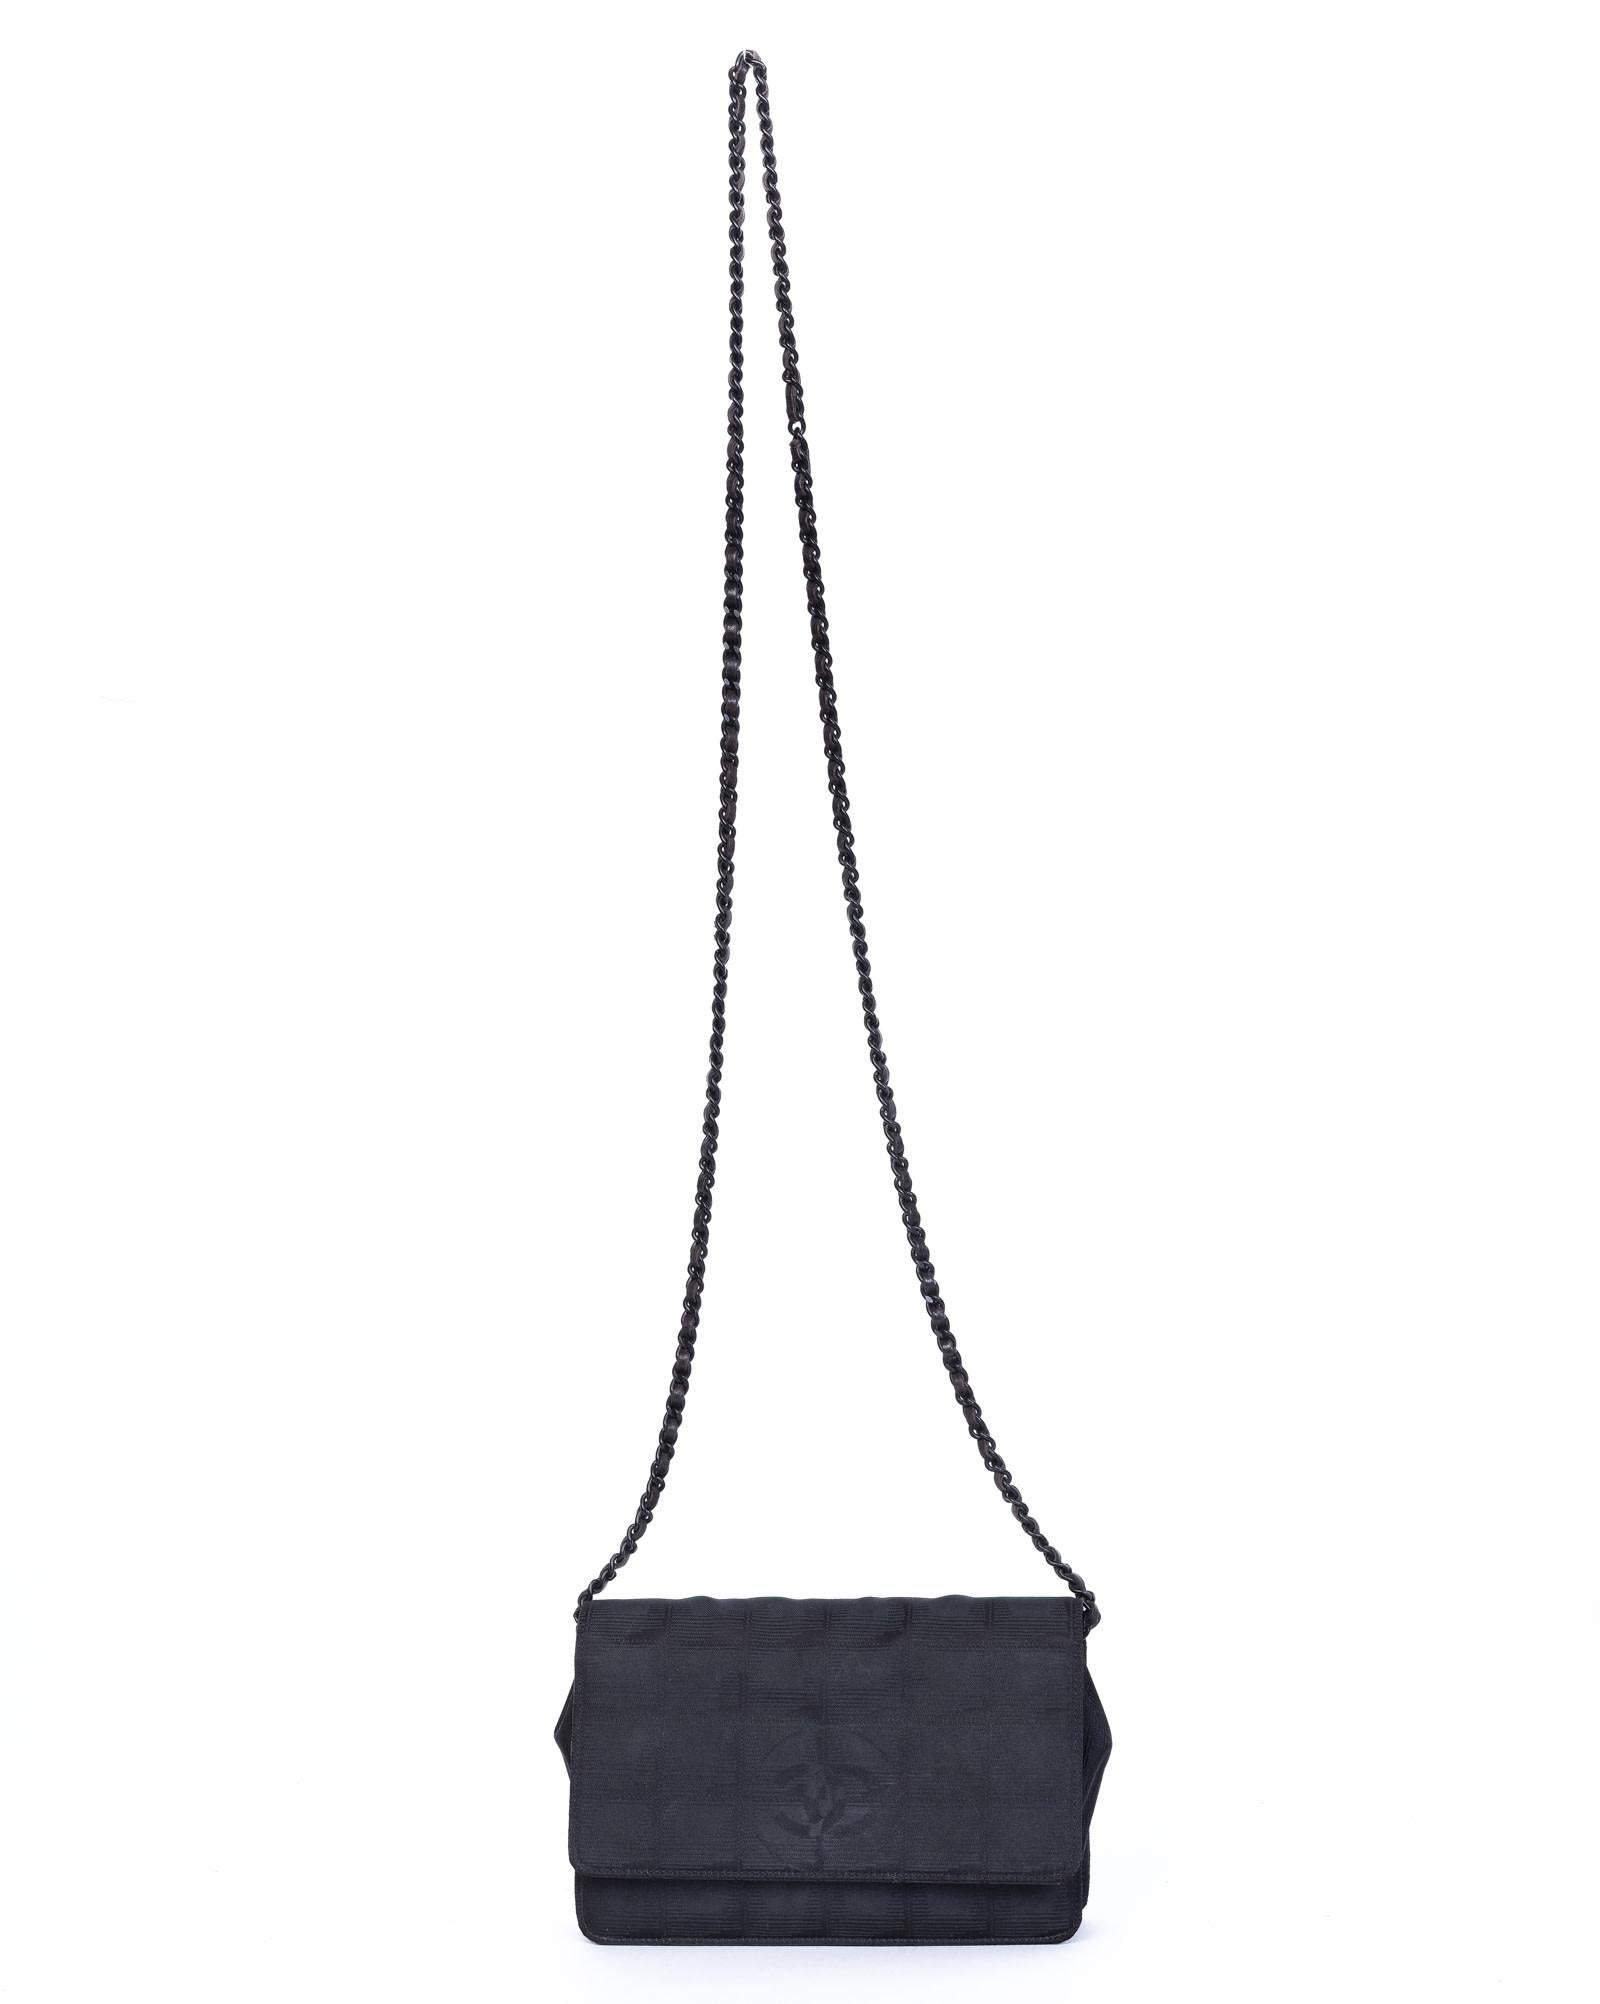 This Chanel Vintage Woc wallet on a chain shoulder bag is constructed in nylon and features three compartments and one compartment with a zipper closure, six card holders, a leather interior, and a black chain strap. (Chanel bags with the serial